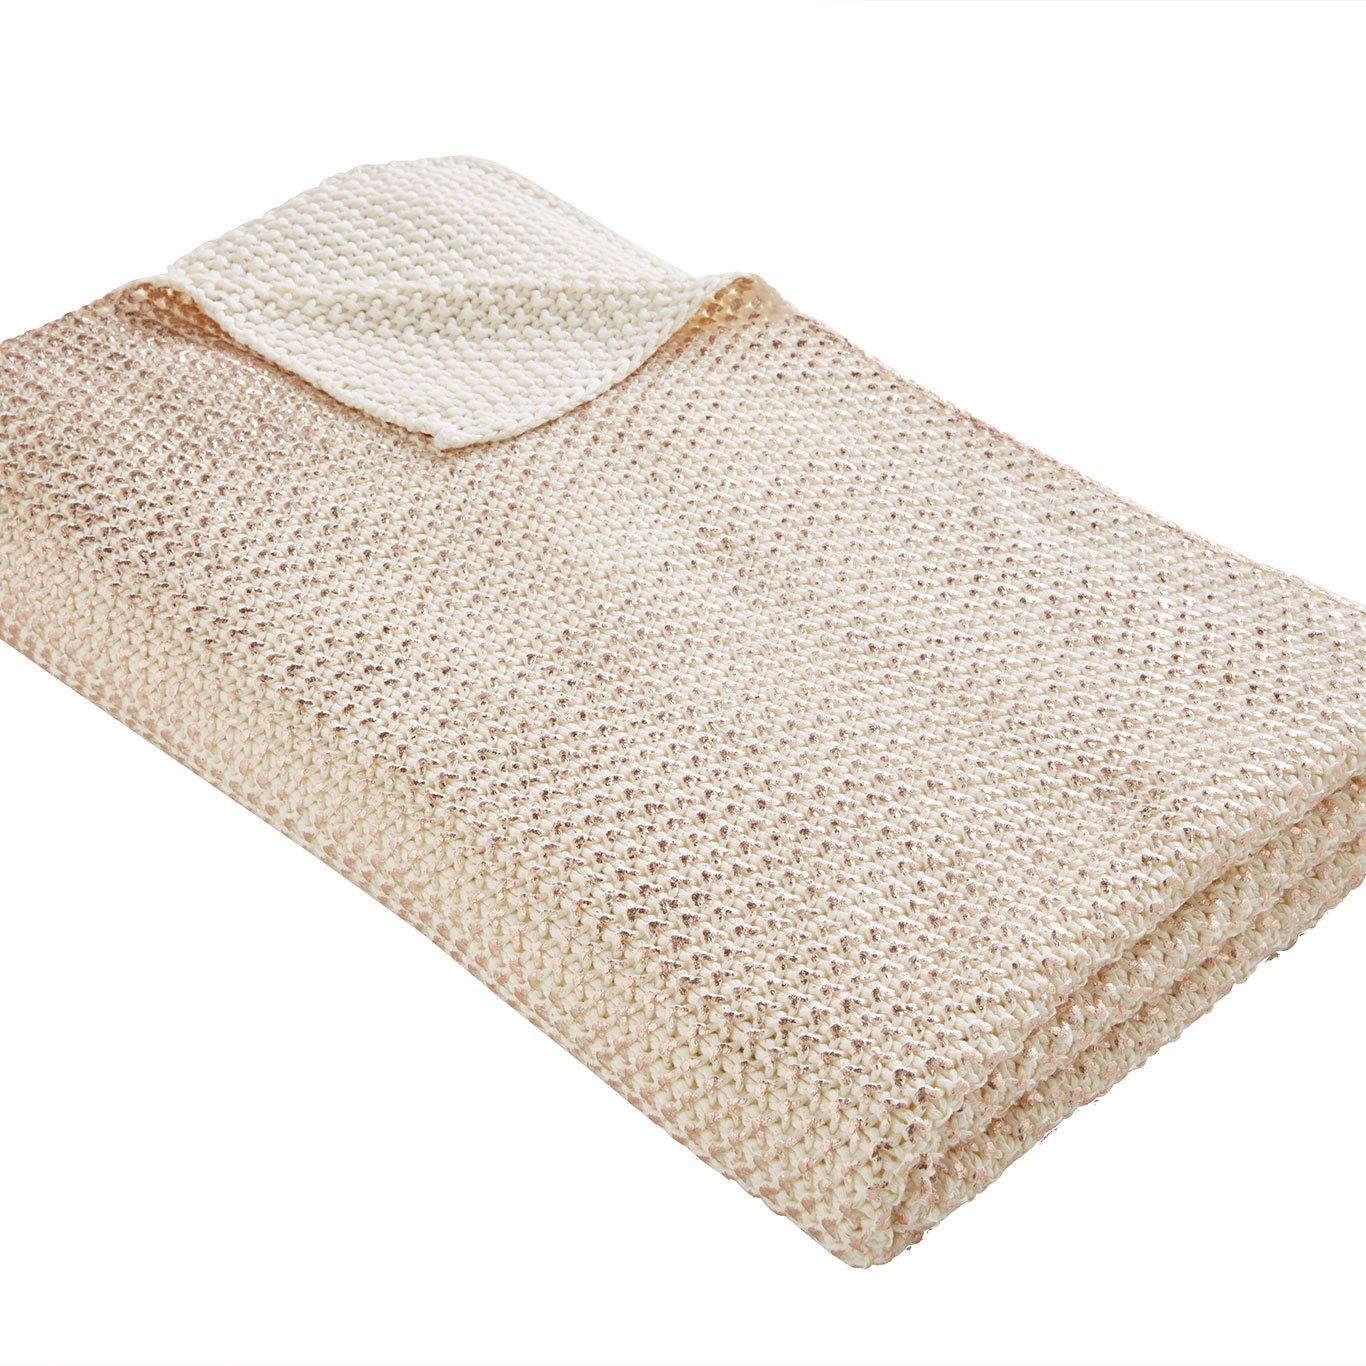 Knit Throw Rose Gold Bedding by TDA